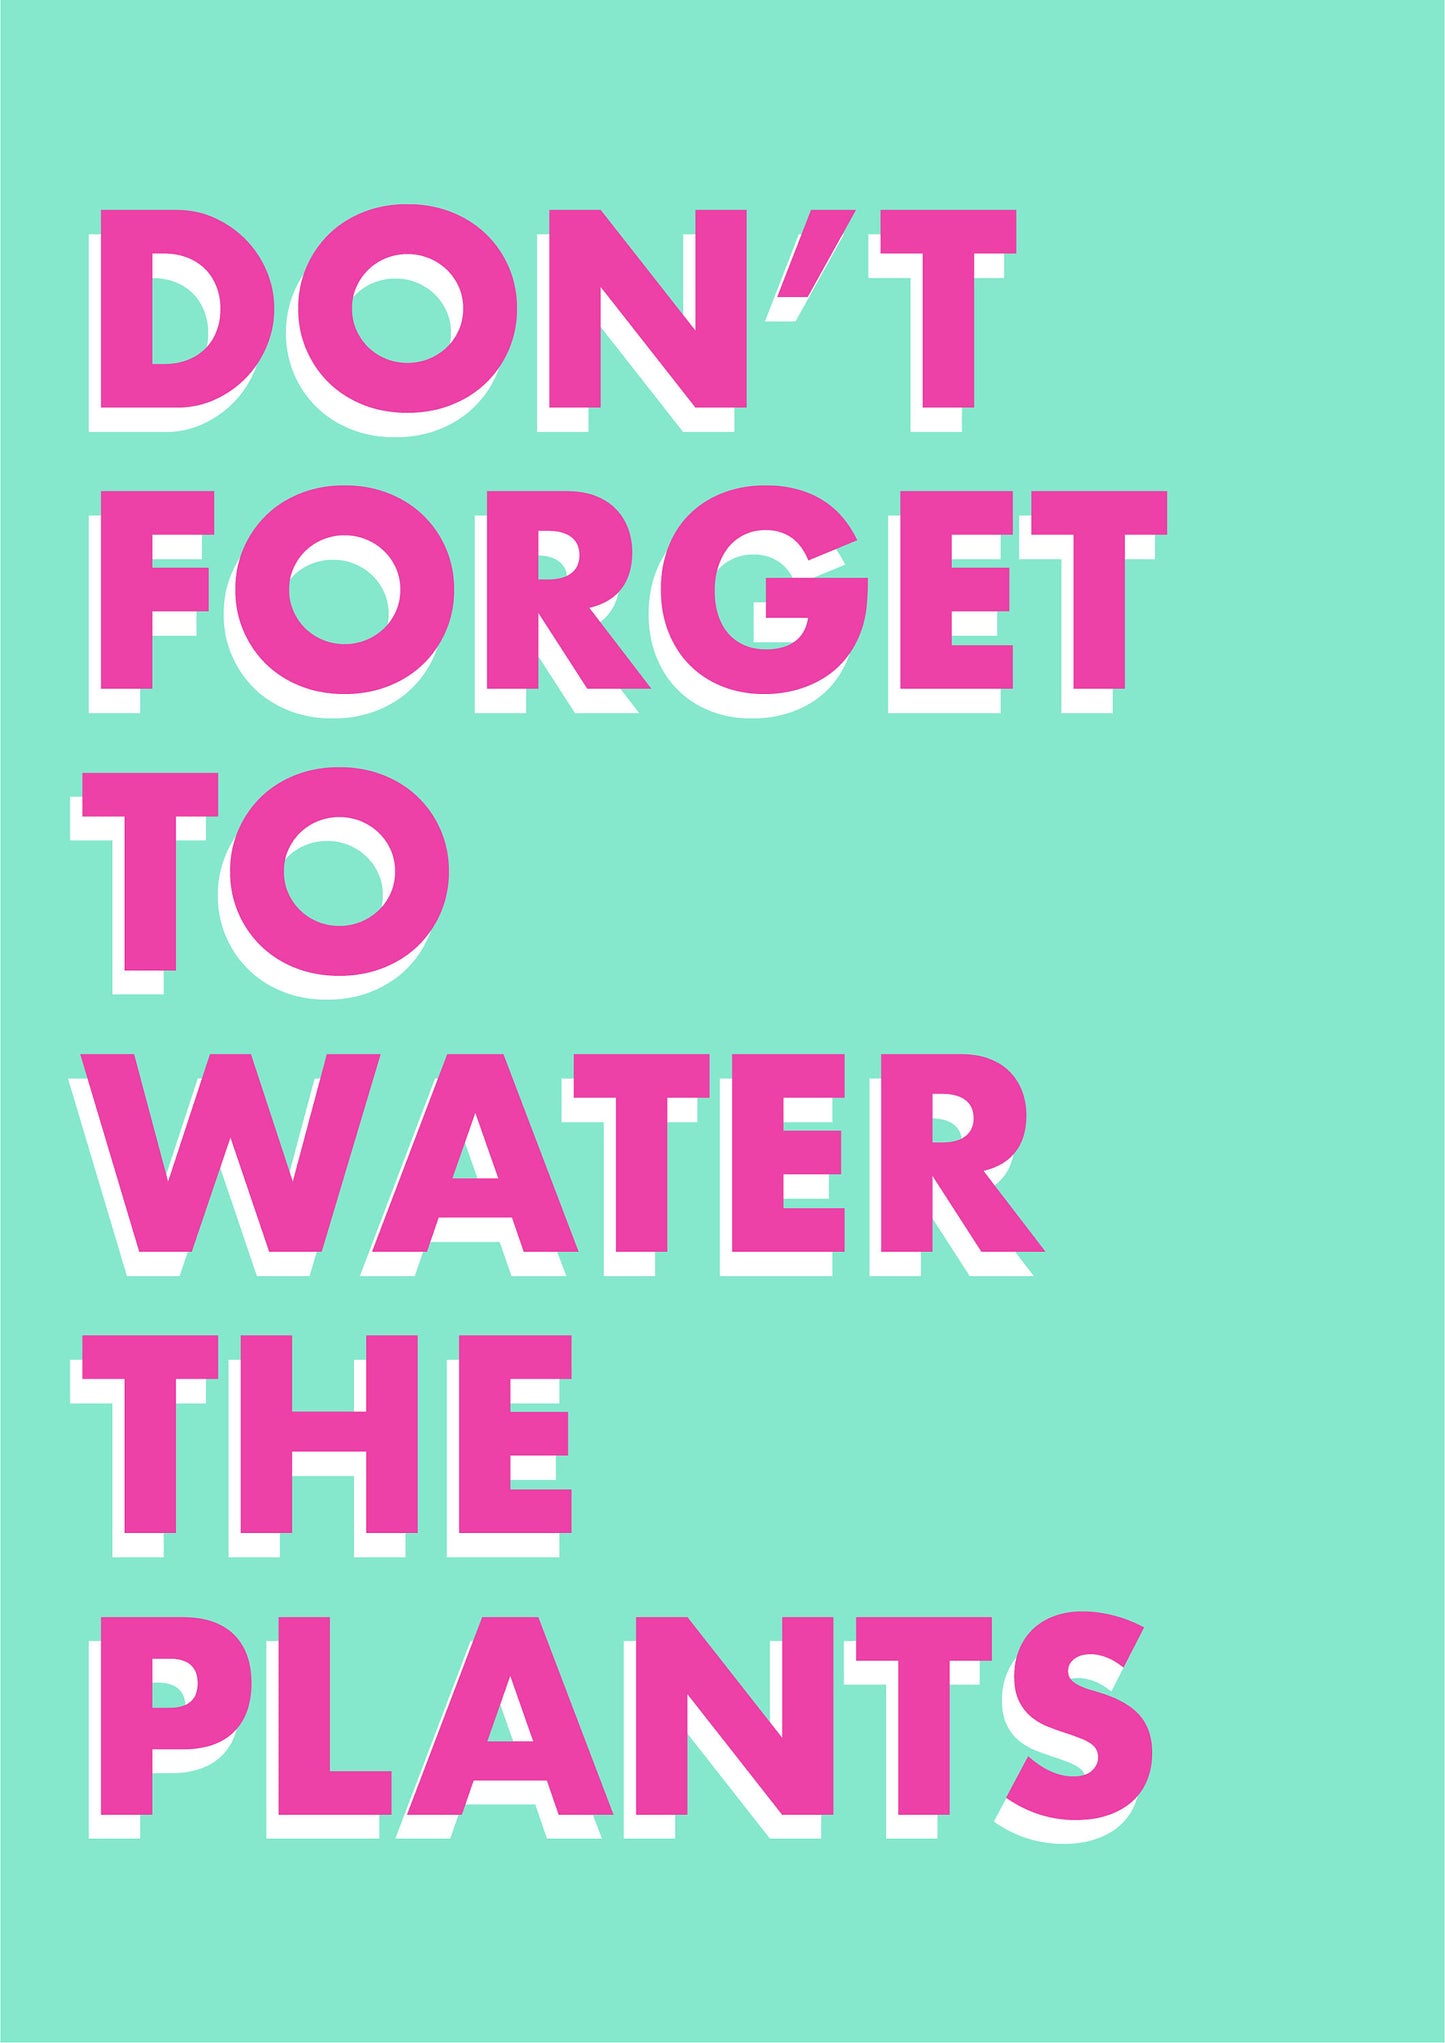 Don't Forget To Water The Plants Quote Print